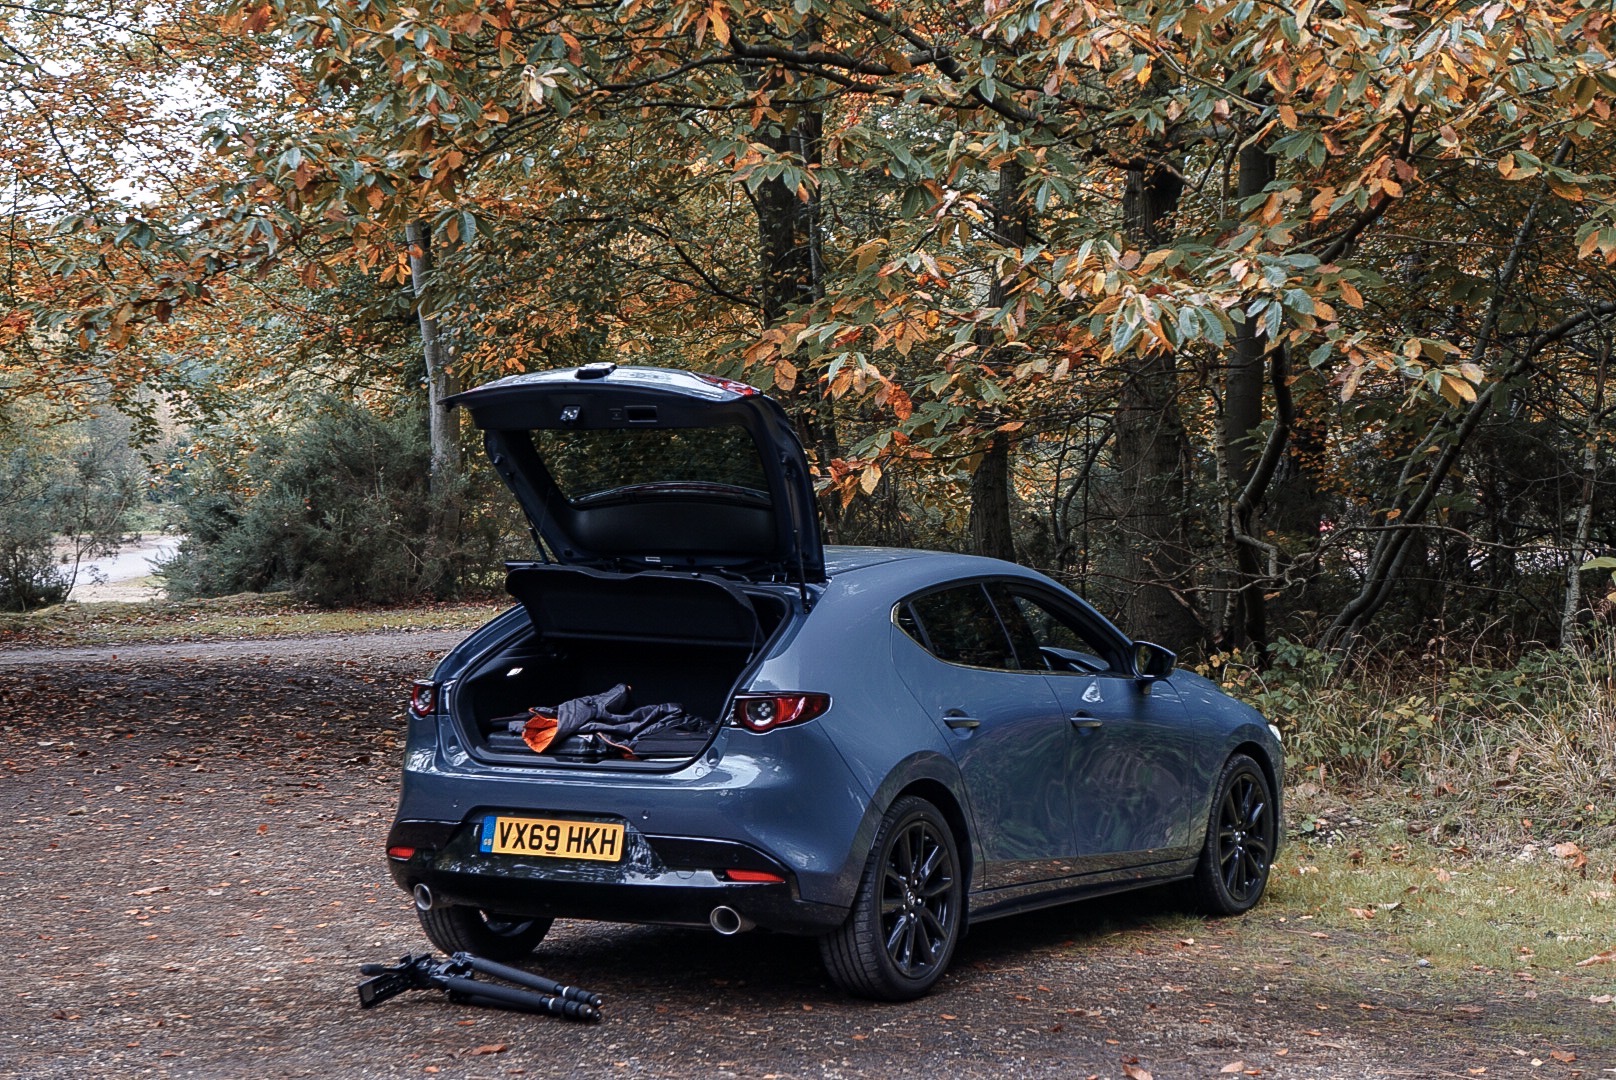 The Mazda's large boot means it's a practical option